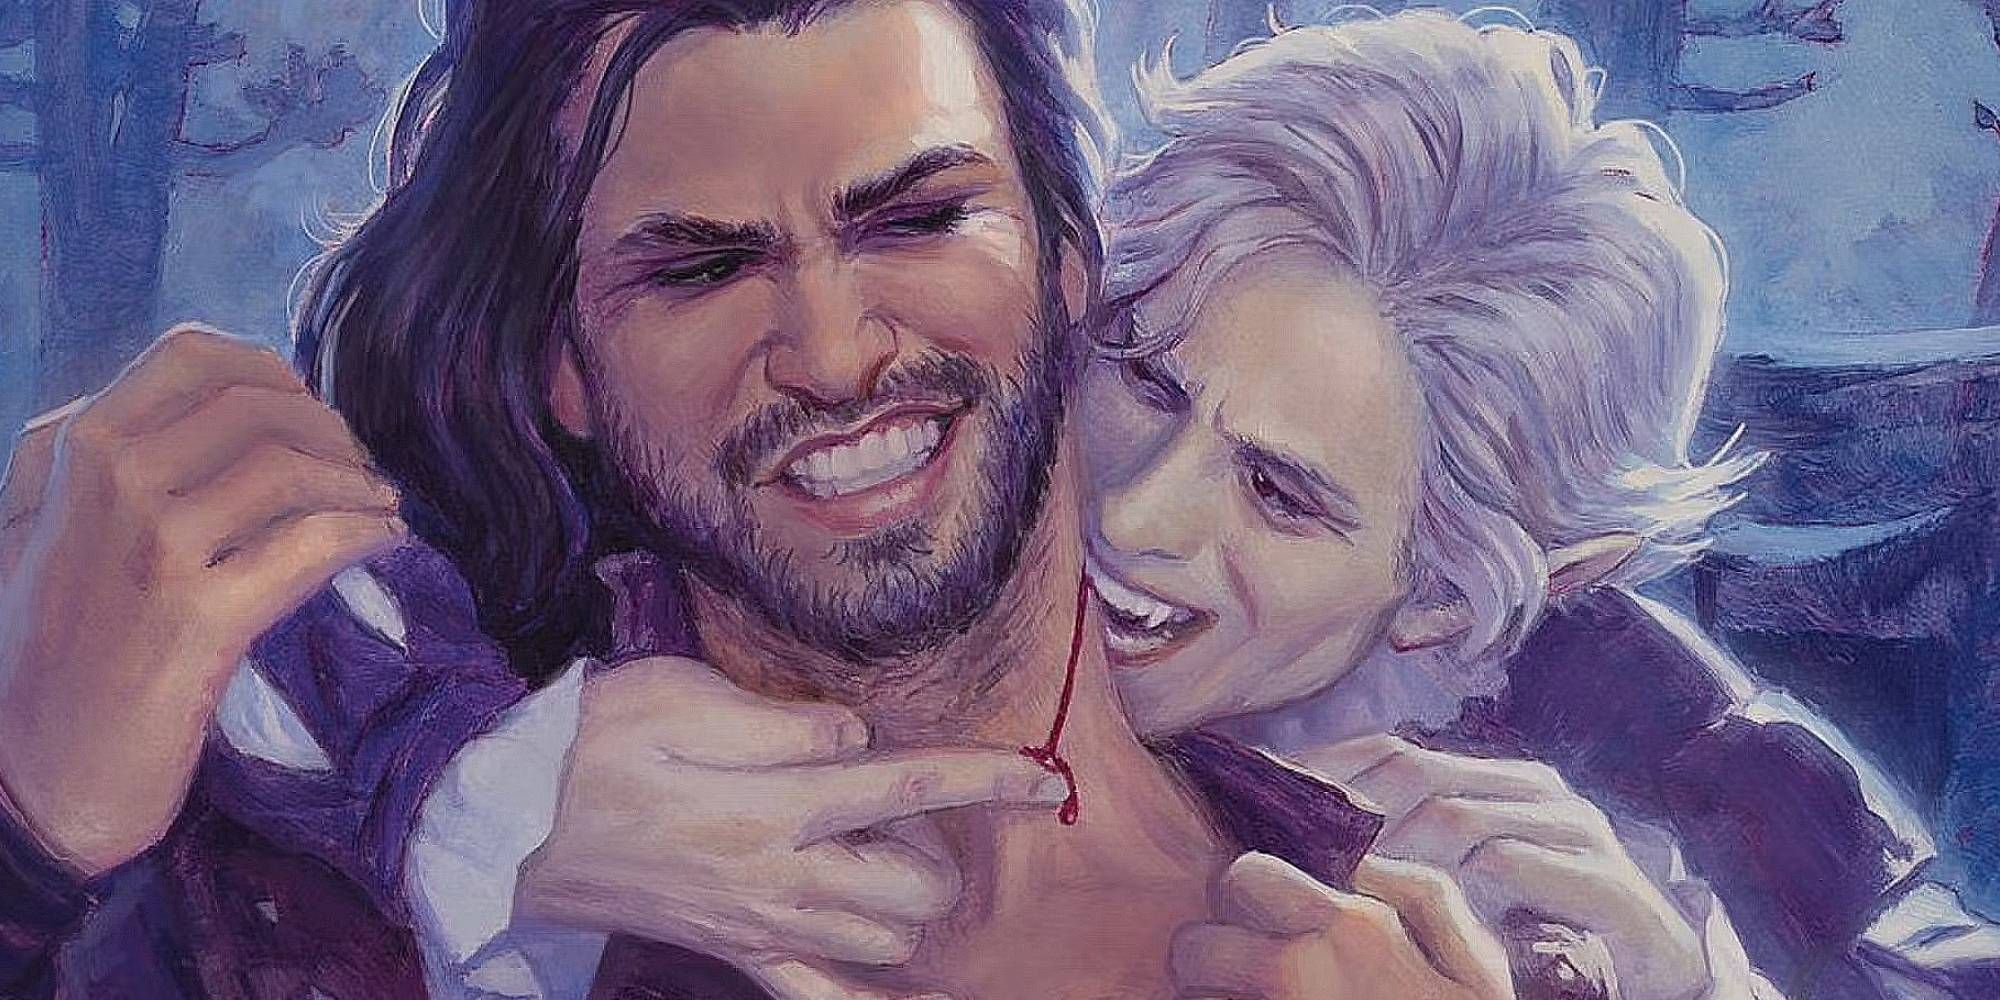 A white haired vampire draws blood from a man